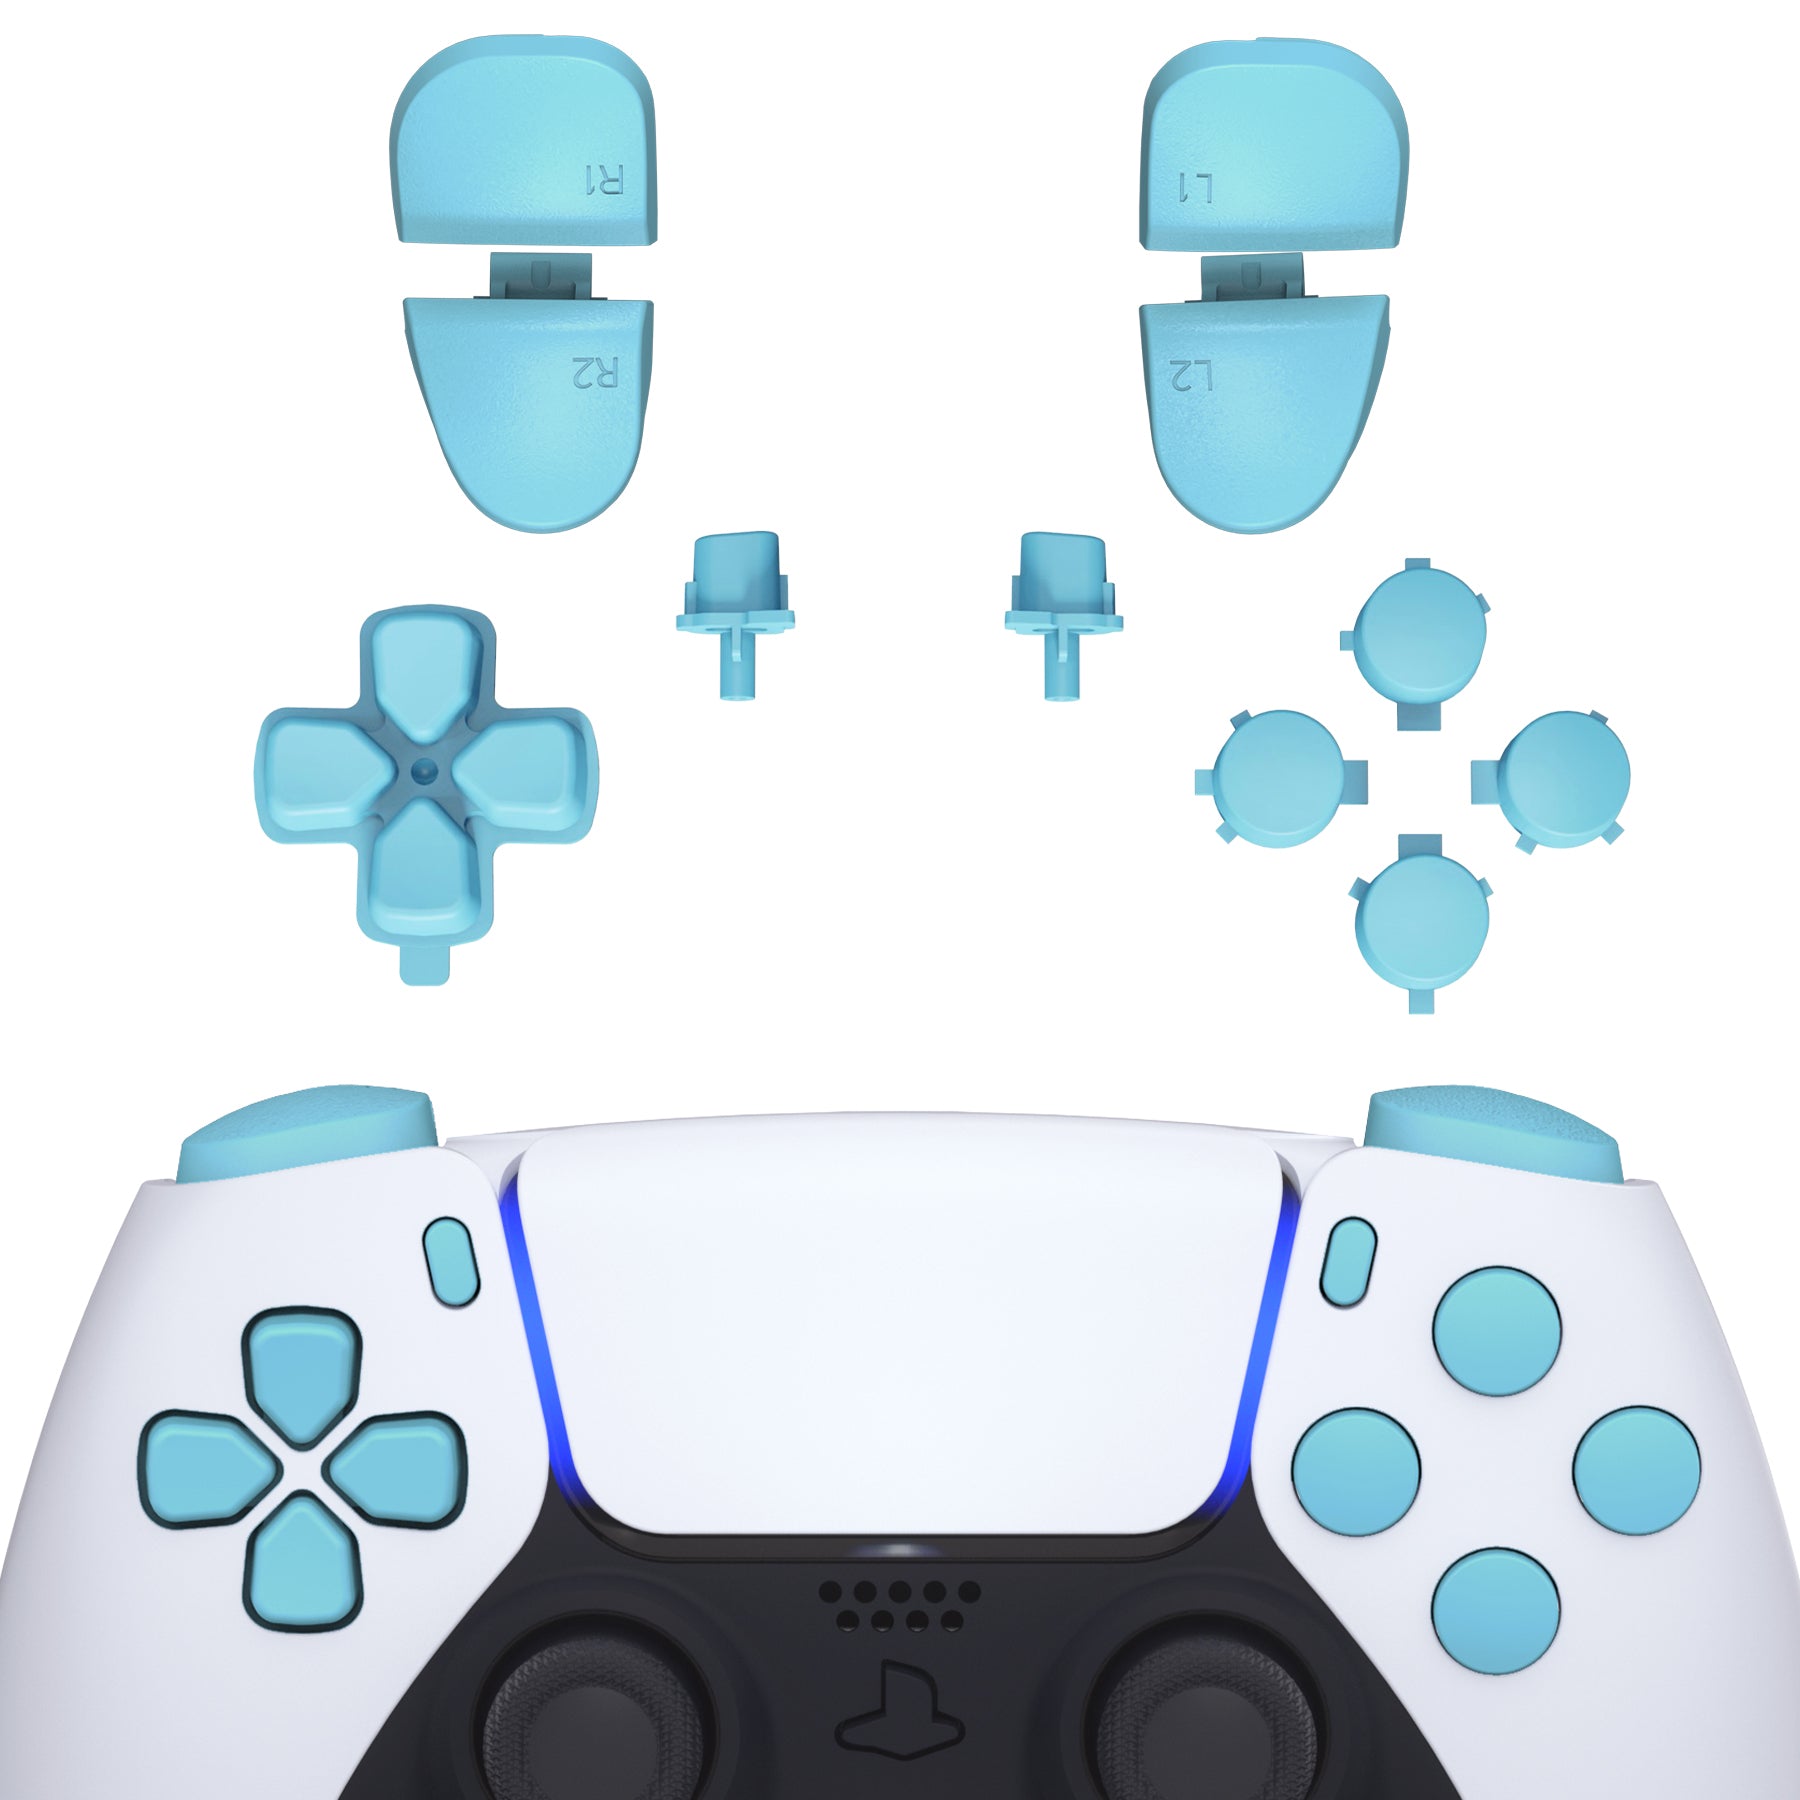 eXtremeRate Retail Replacement D-pad R1 L1 R2 L2 Triggers Share Options Face Buttons, Heaven Blue Full Set Buttons Compatible with ps5 Controller BDM-030 - JPF1011G3